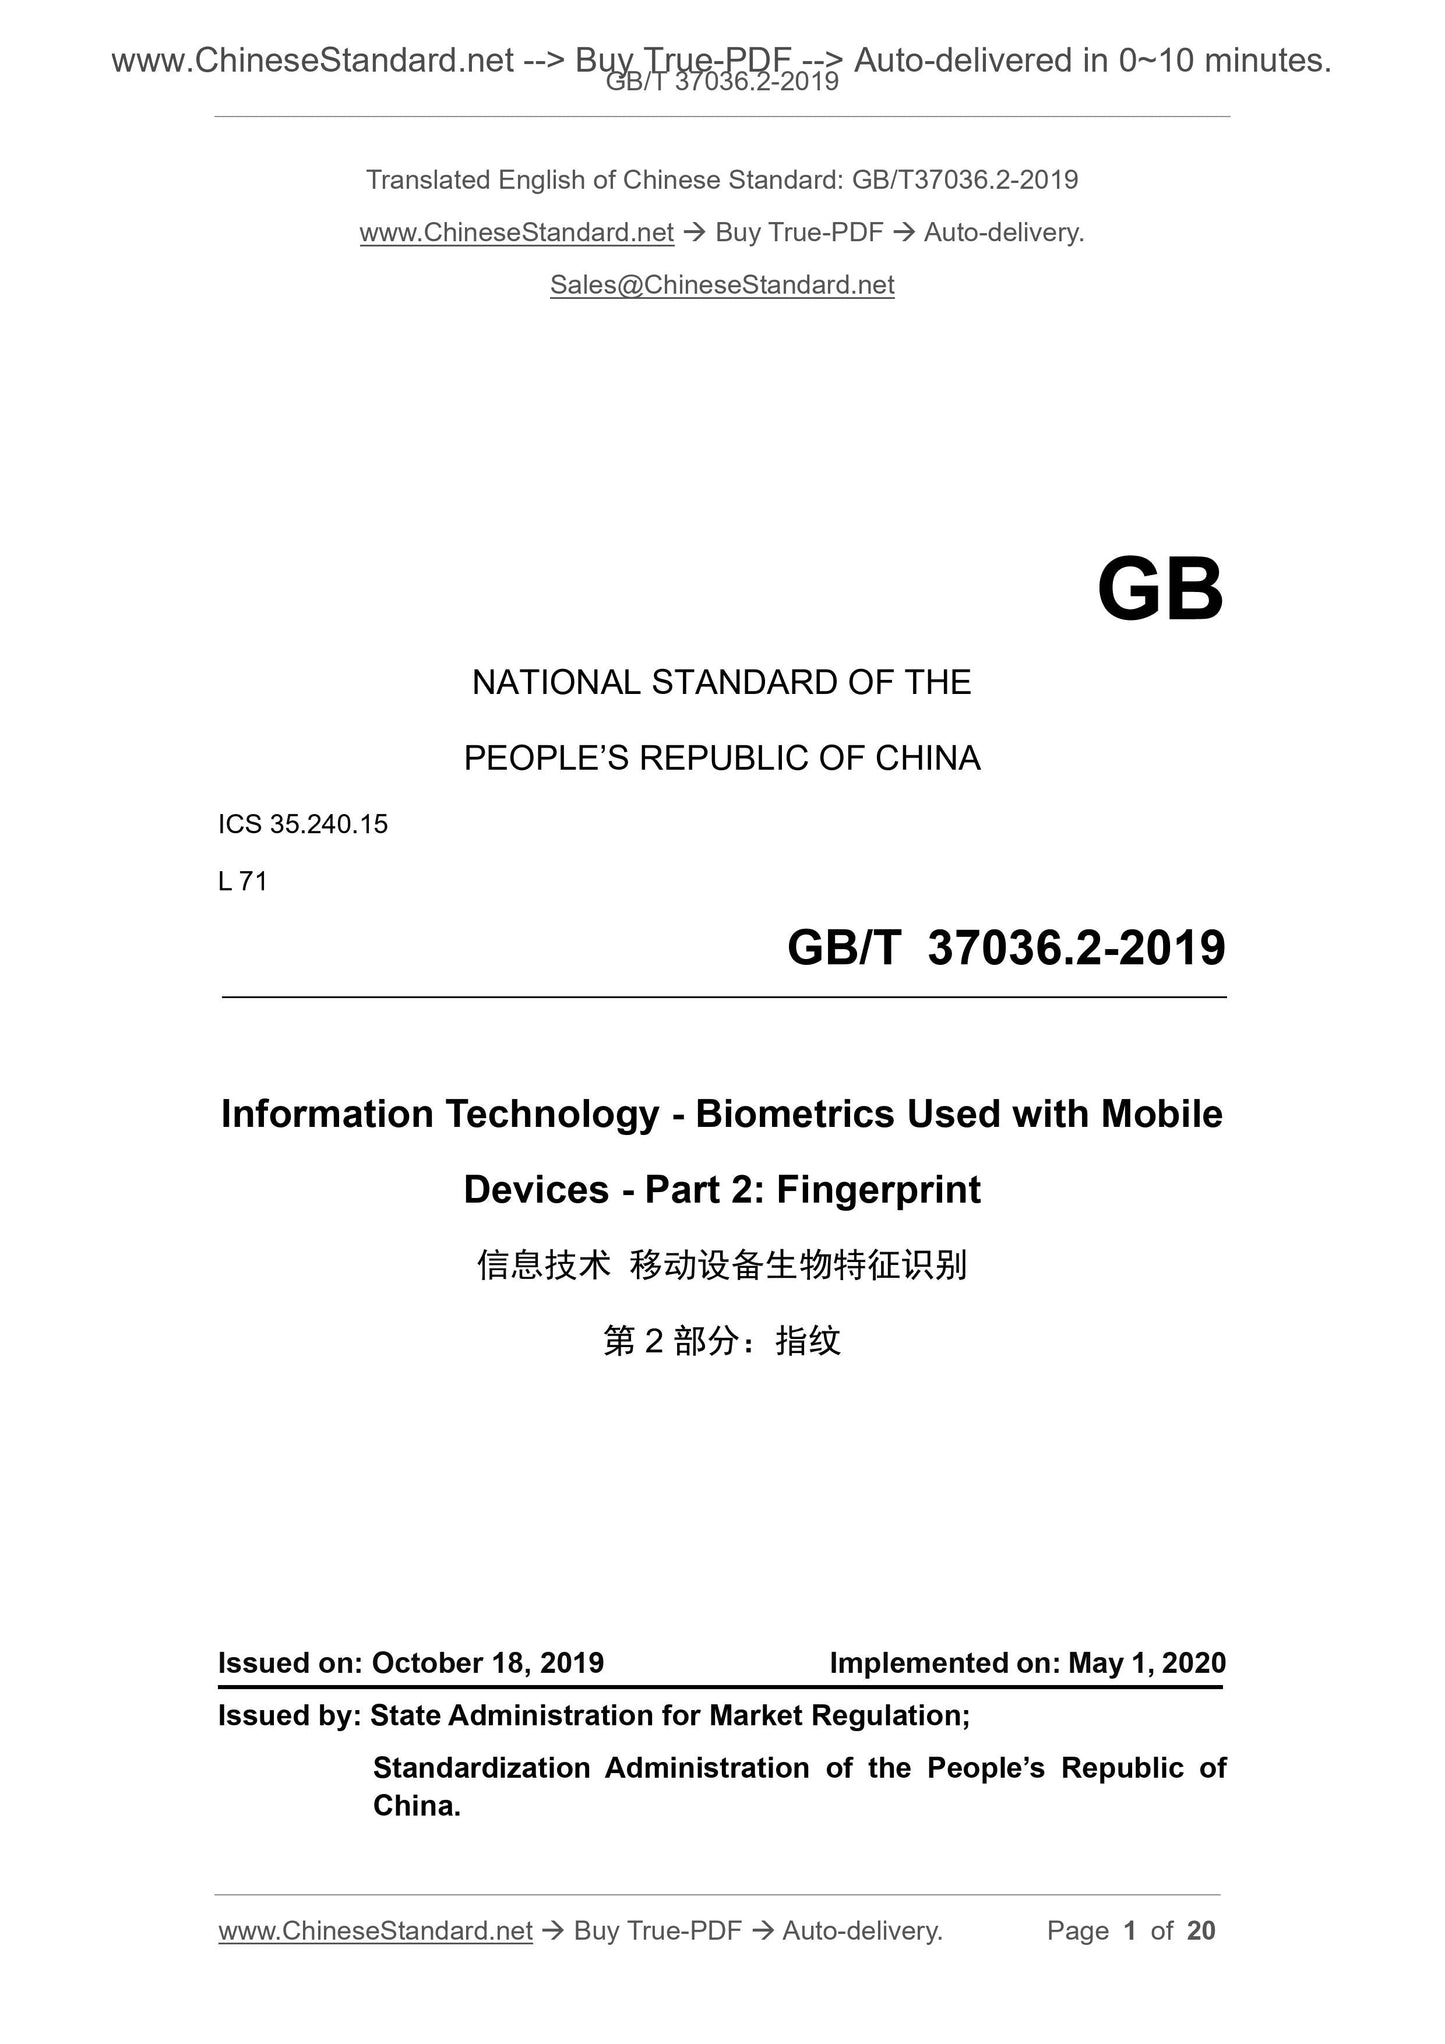 GB/T 37036.2-2019 Page 1